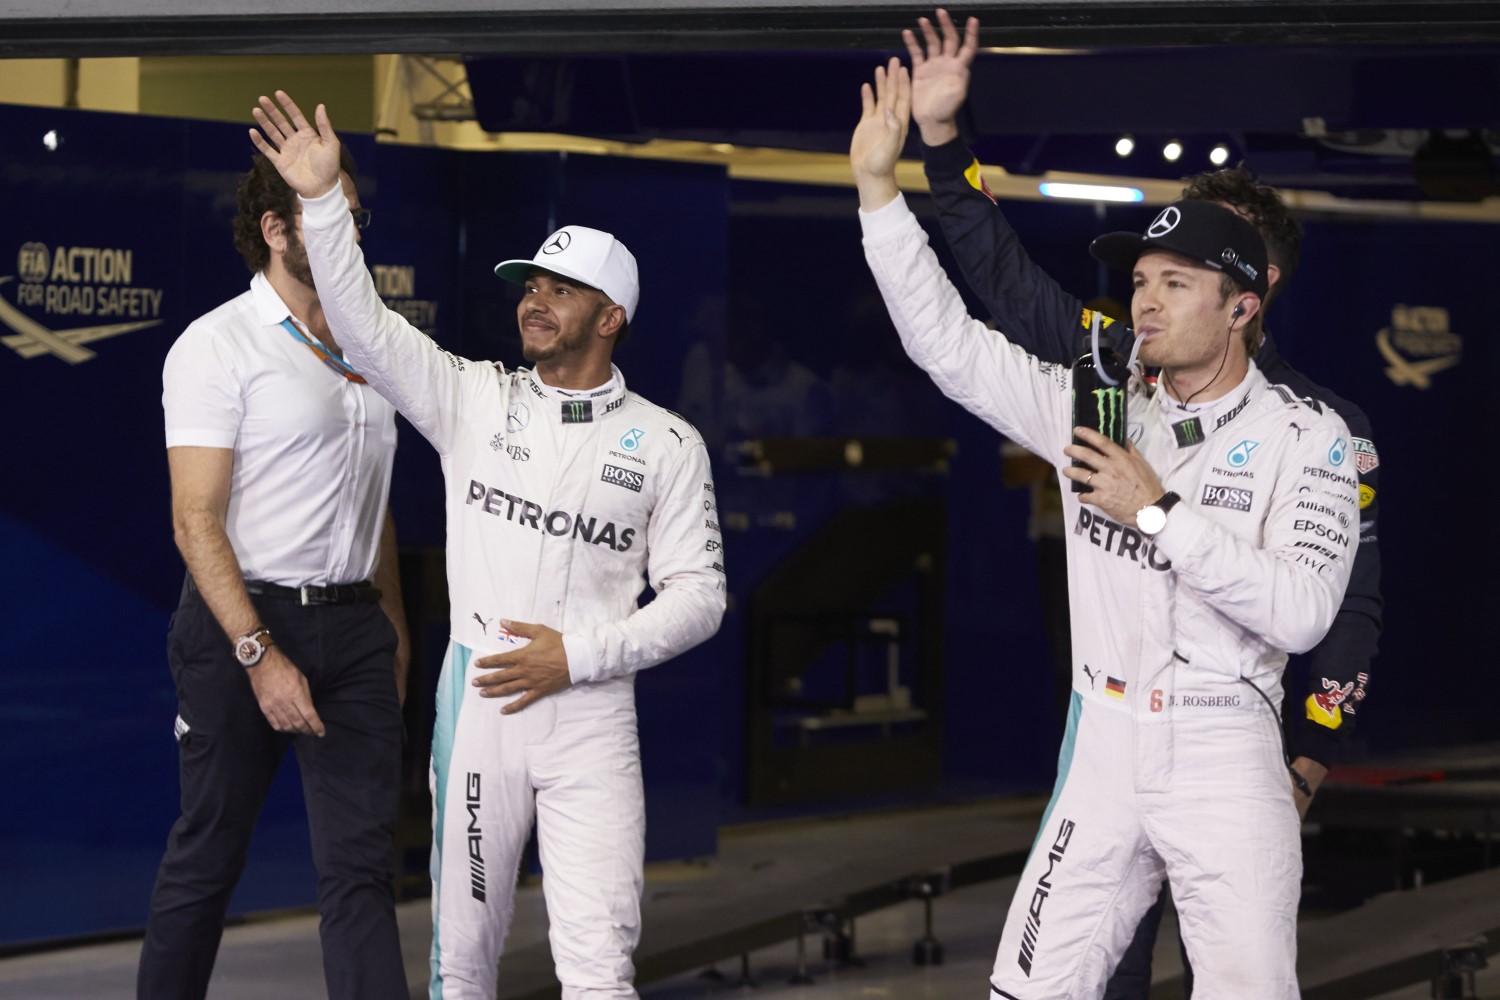 Expect the Mercedes drivers to parade to another 1-2 finish and the title will be Rosbergs